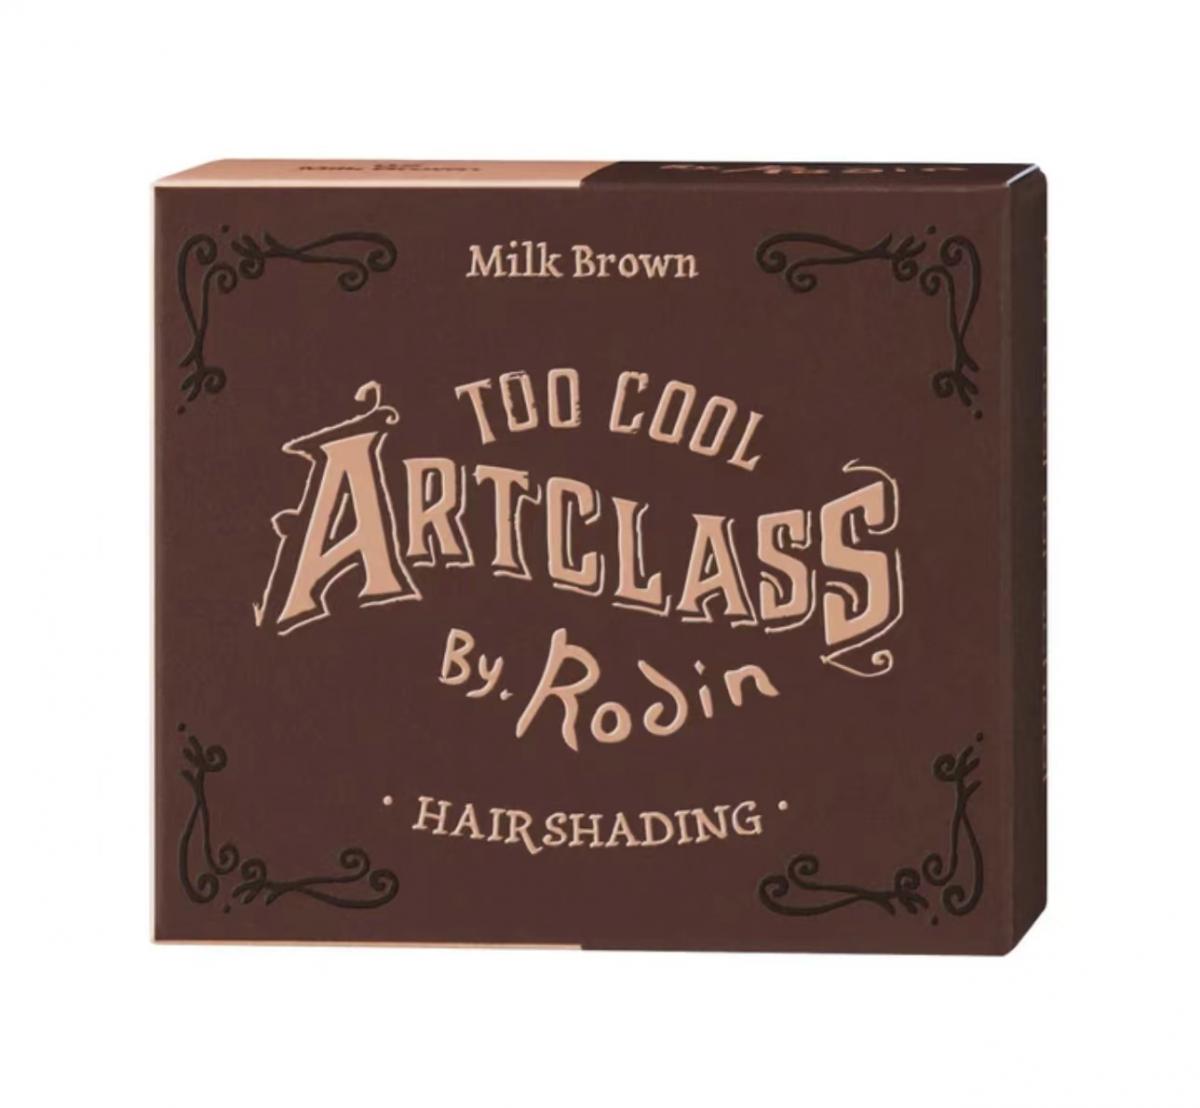 too cool for school - *Artclass by Rodin Hair Shading #02 Milk Brown (8809658628725)[Parallel Import]